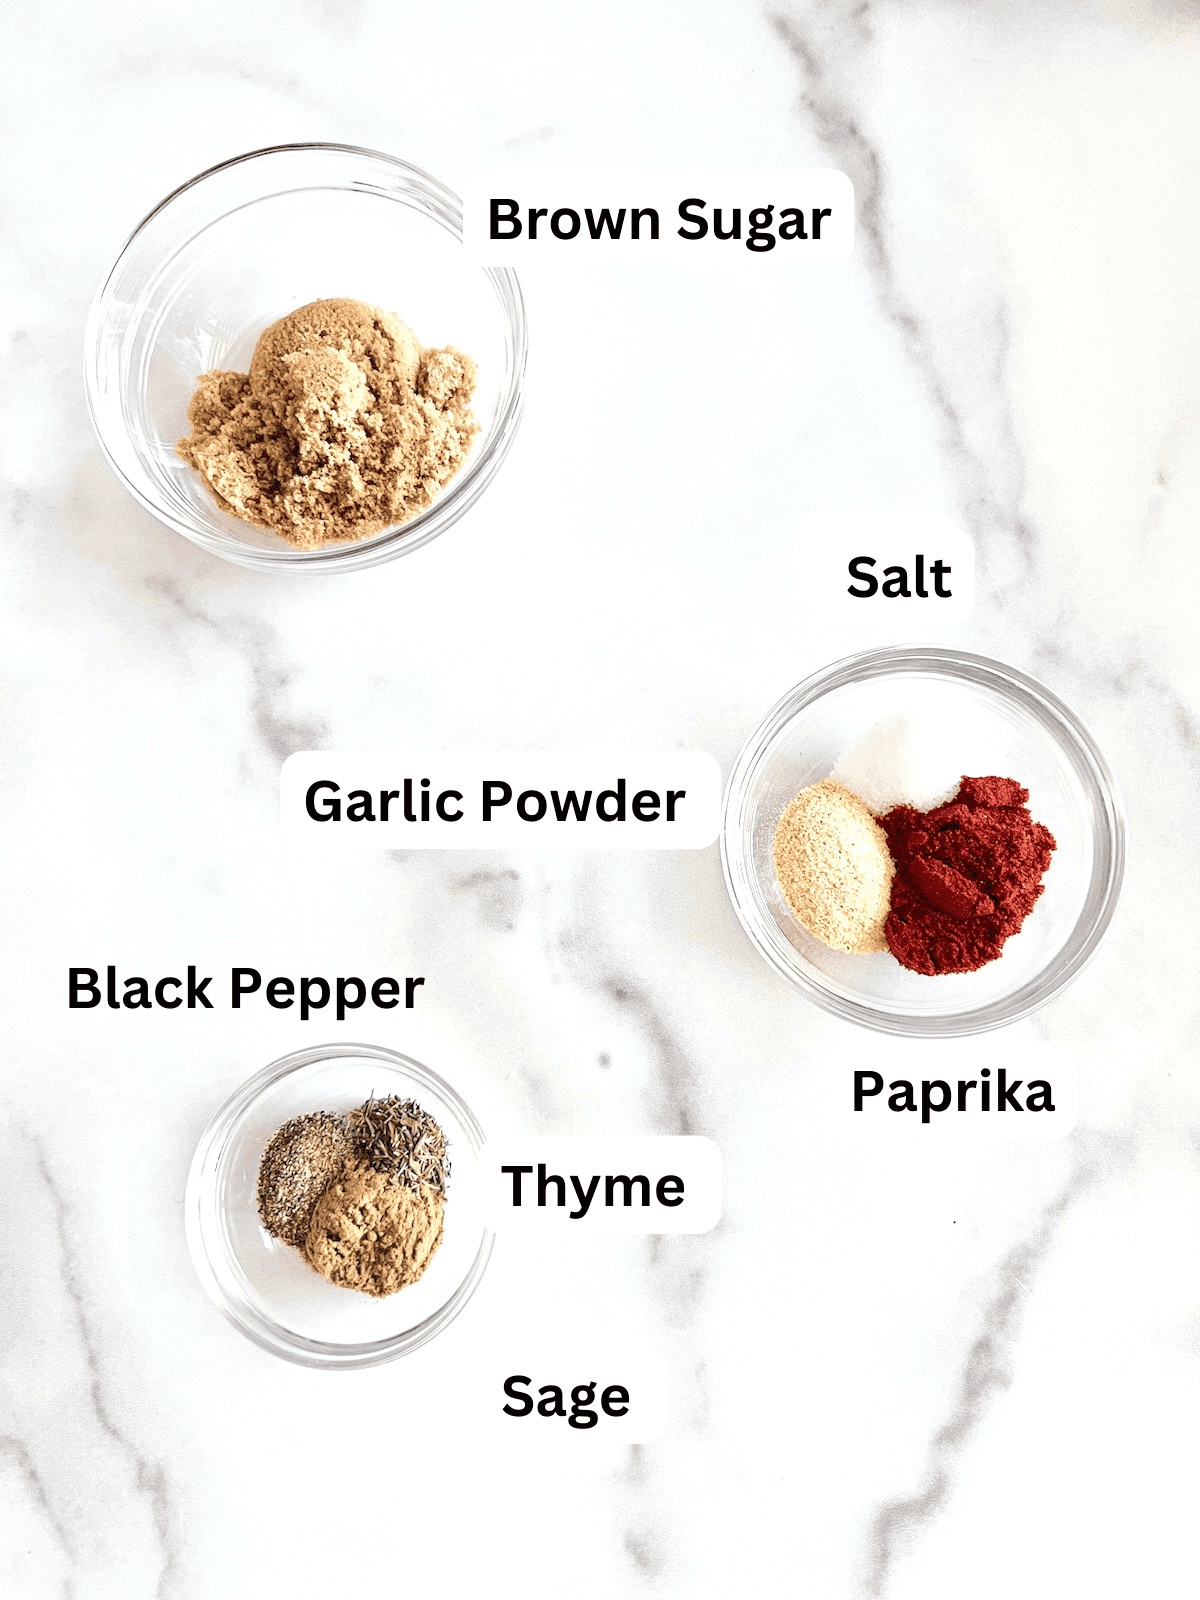 Dry Rub Ingredients Labeled to be used on home cooked pork chops.